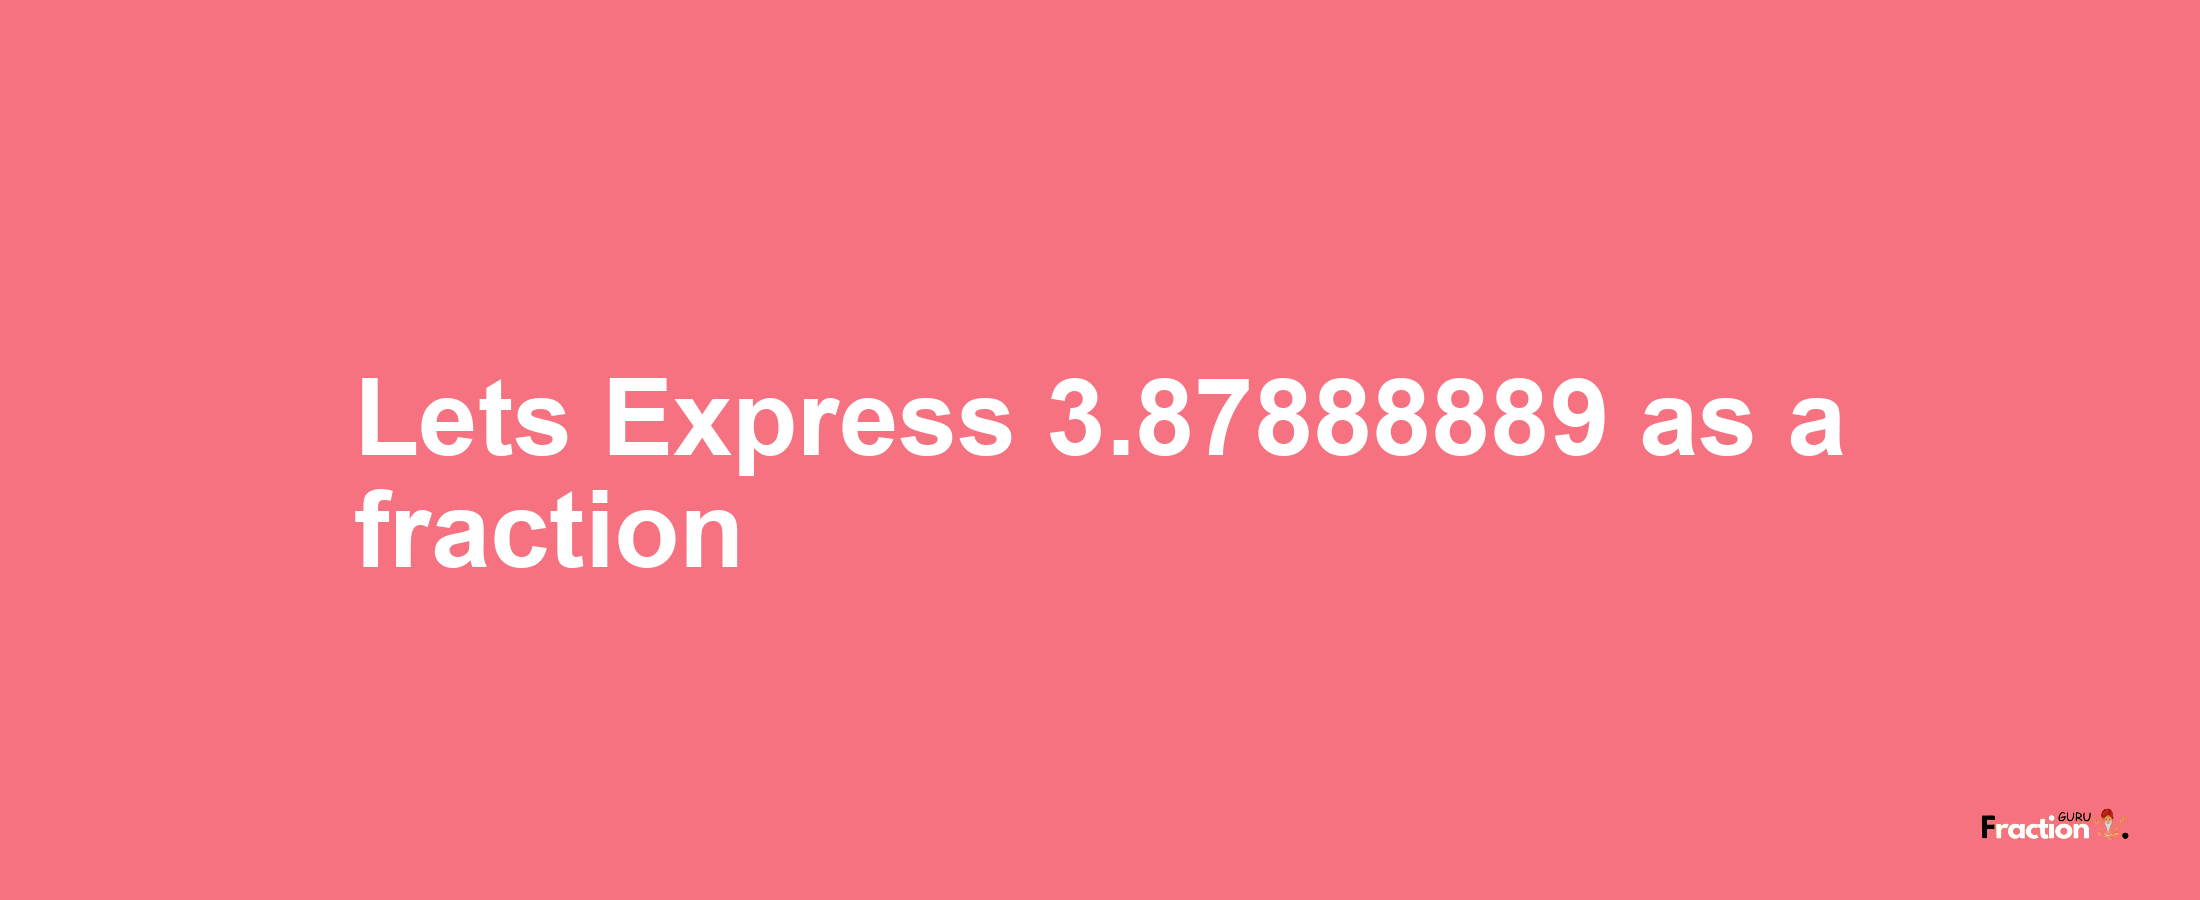 Lets Express 3.87888889 as afraction